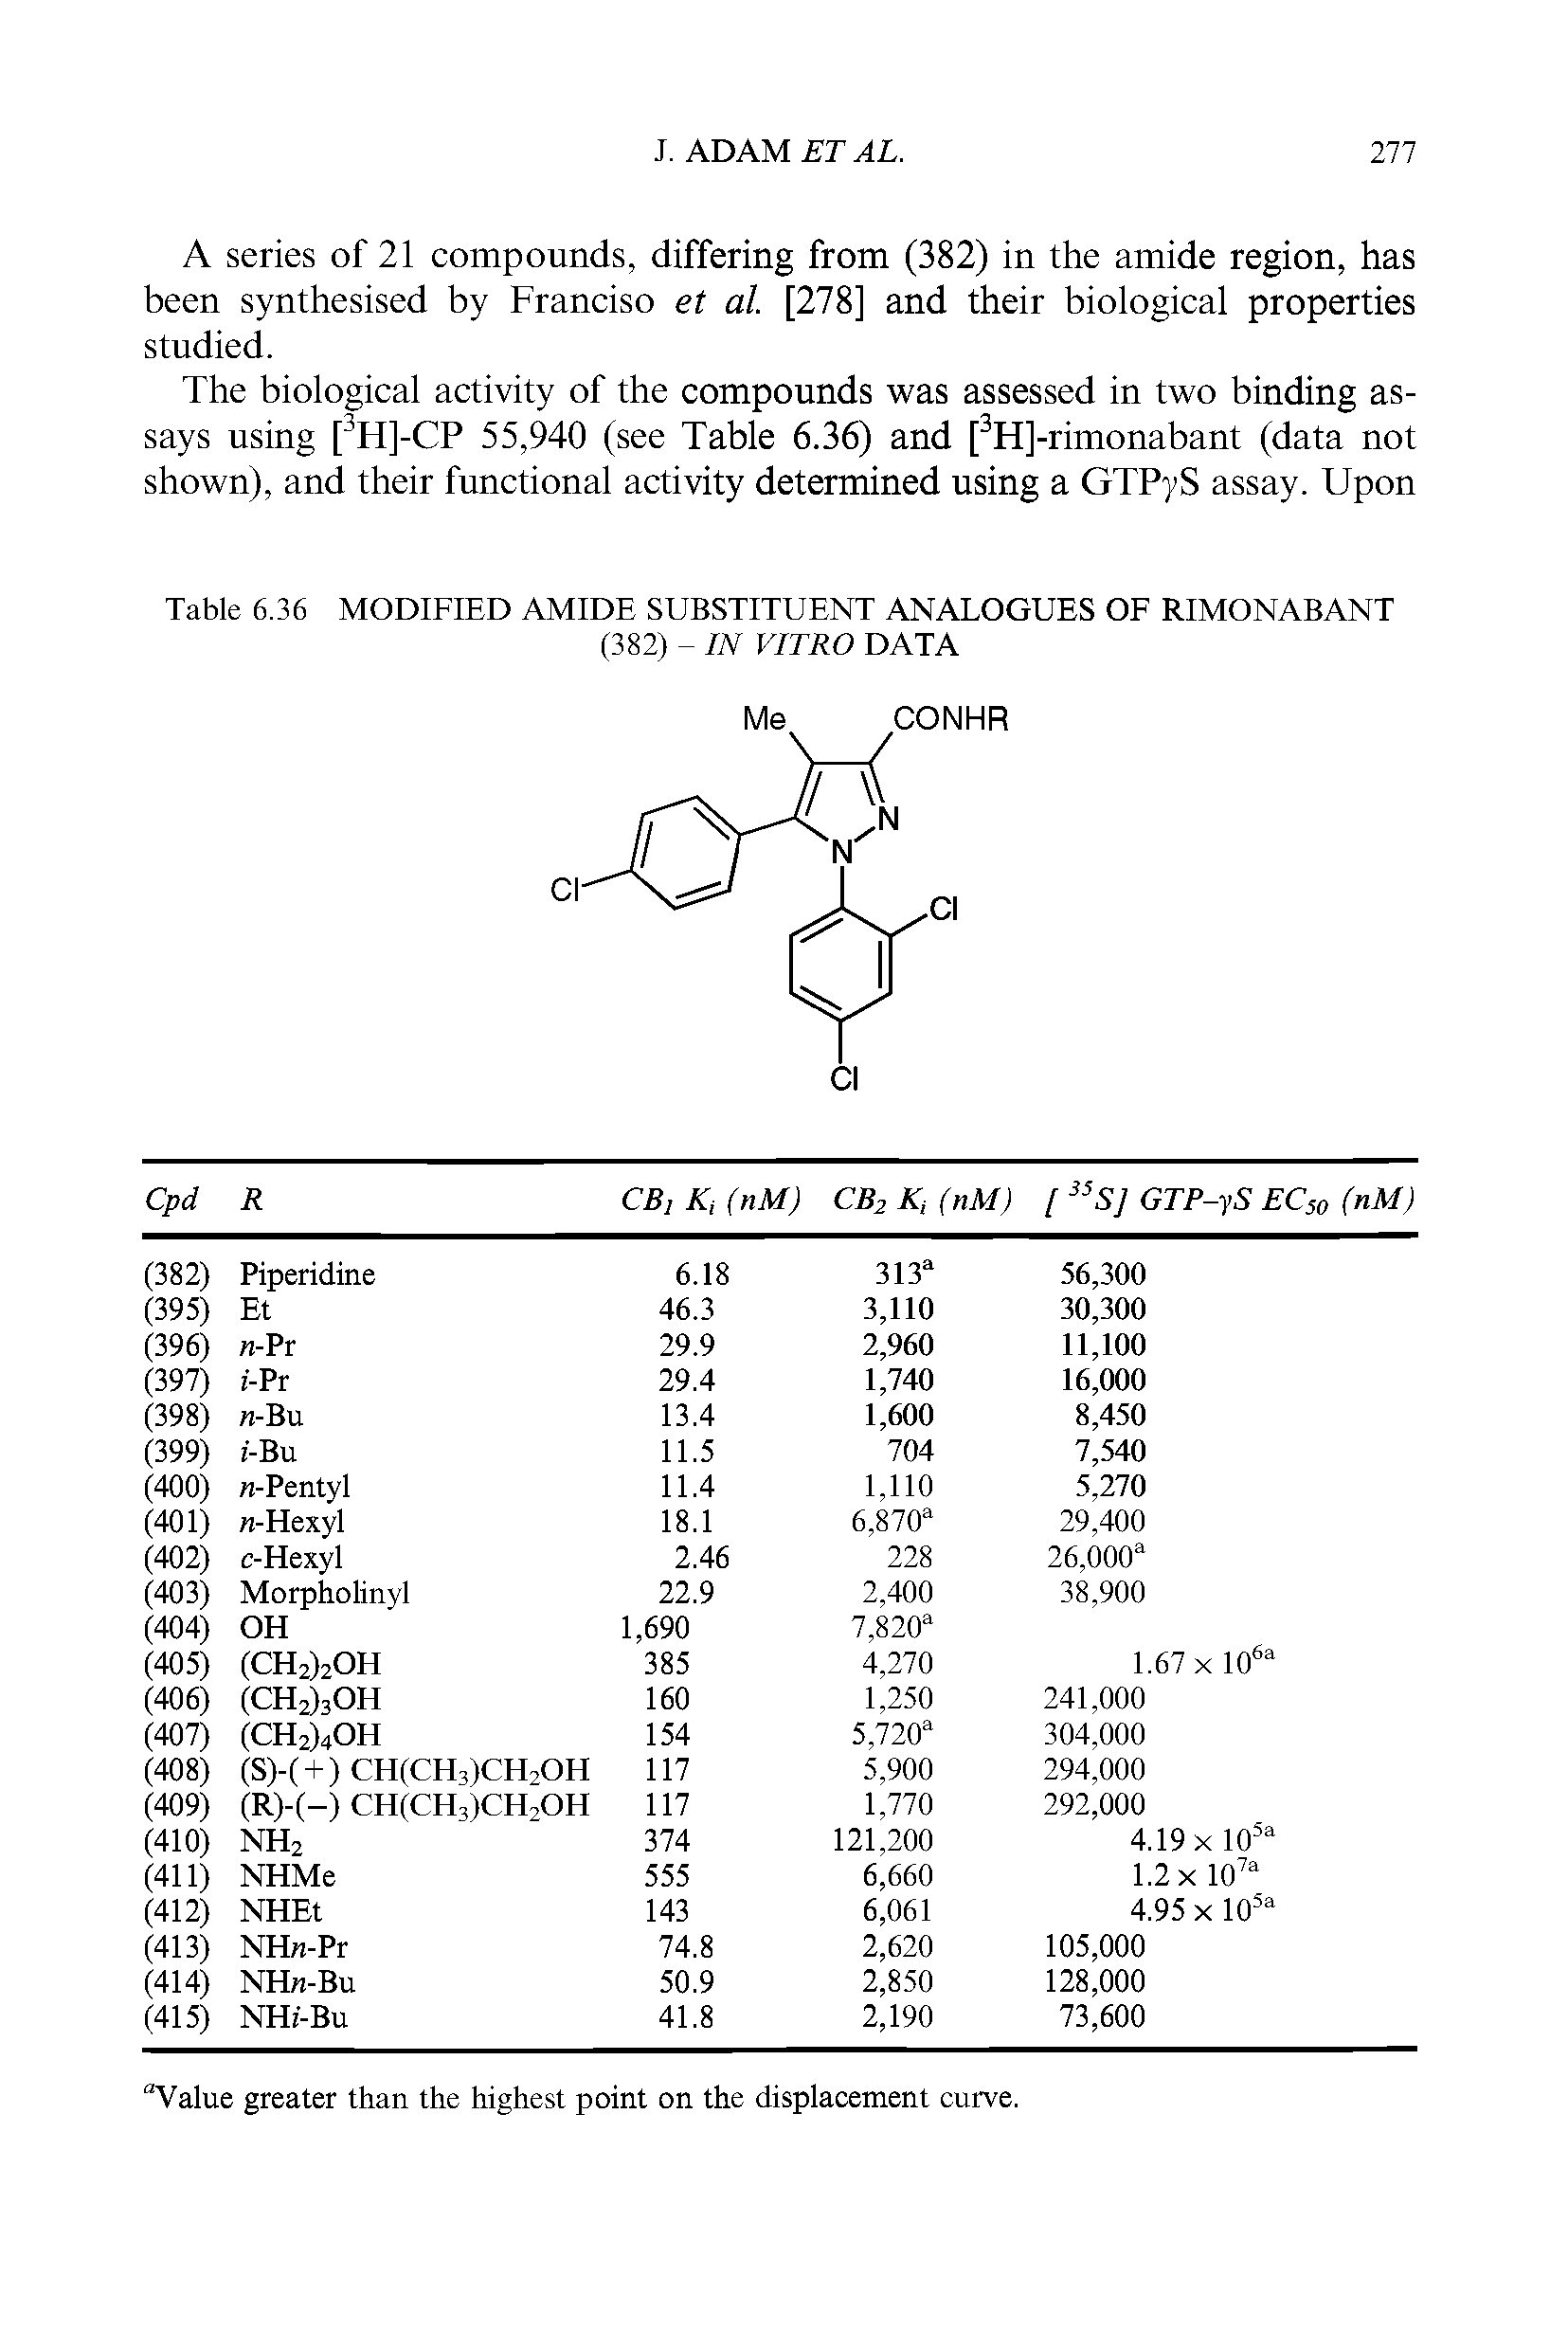 Table 6.36 MODIFIED AMIDE SUBSTITUENT ANALOGUES OF RIMONABANT...